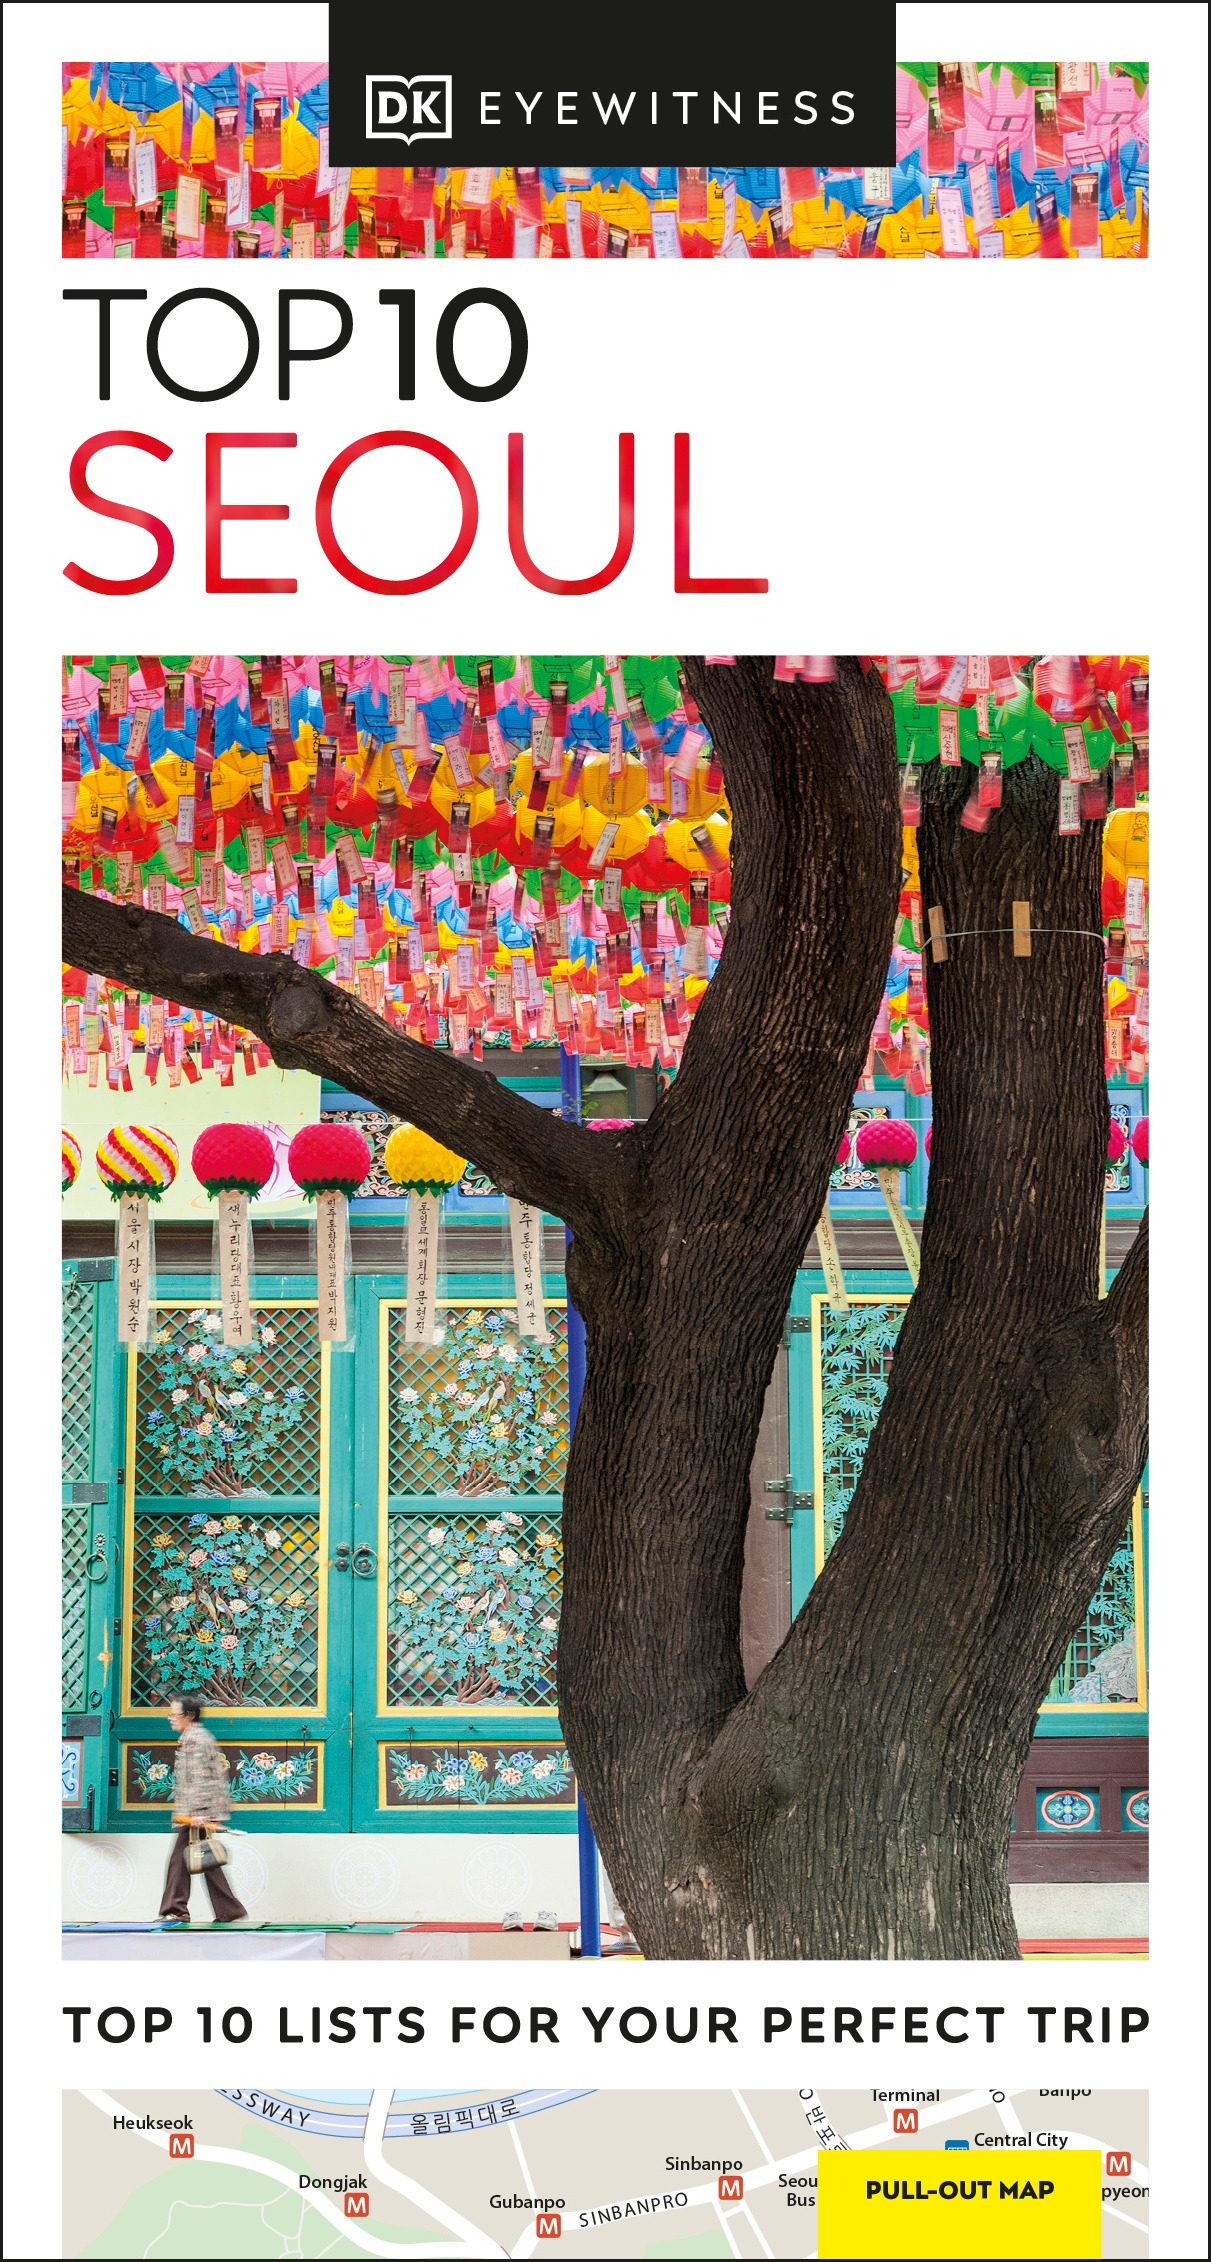 Top 10 Seoul by Travel - Penguin Books